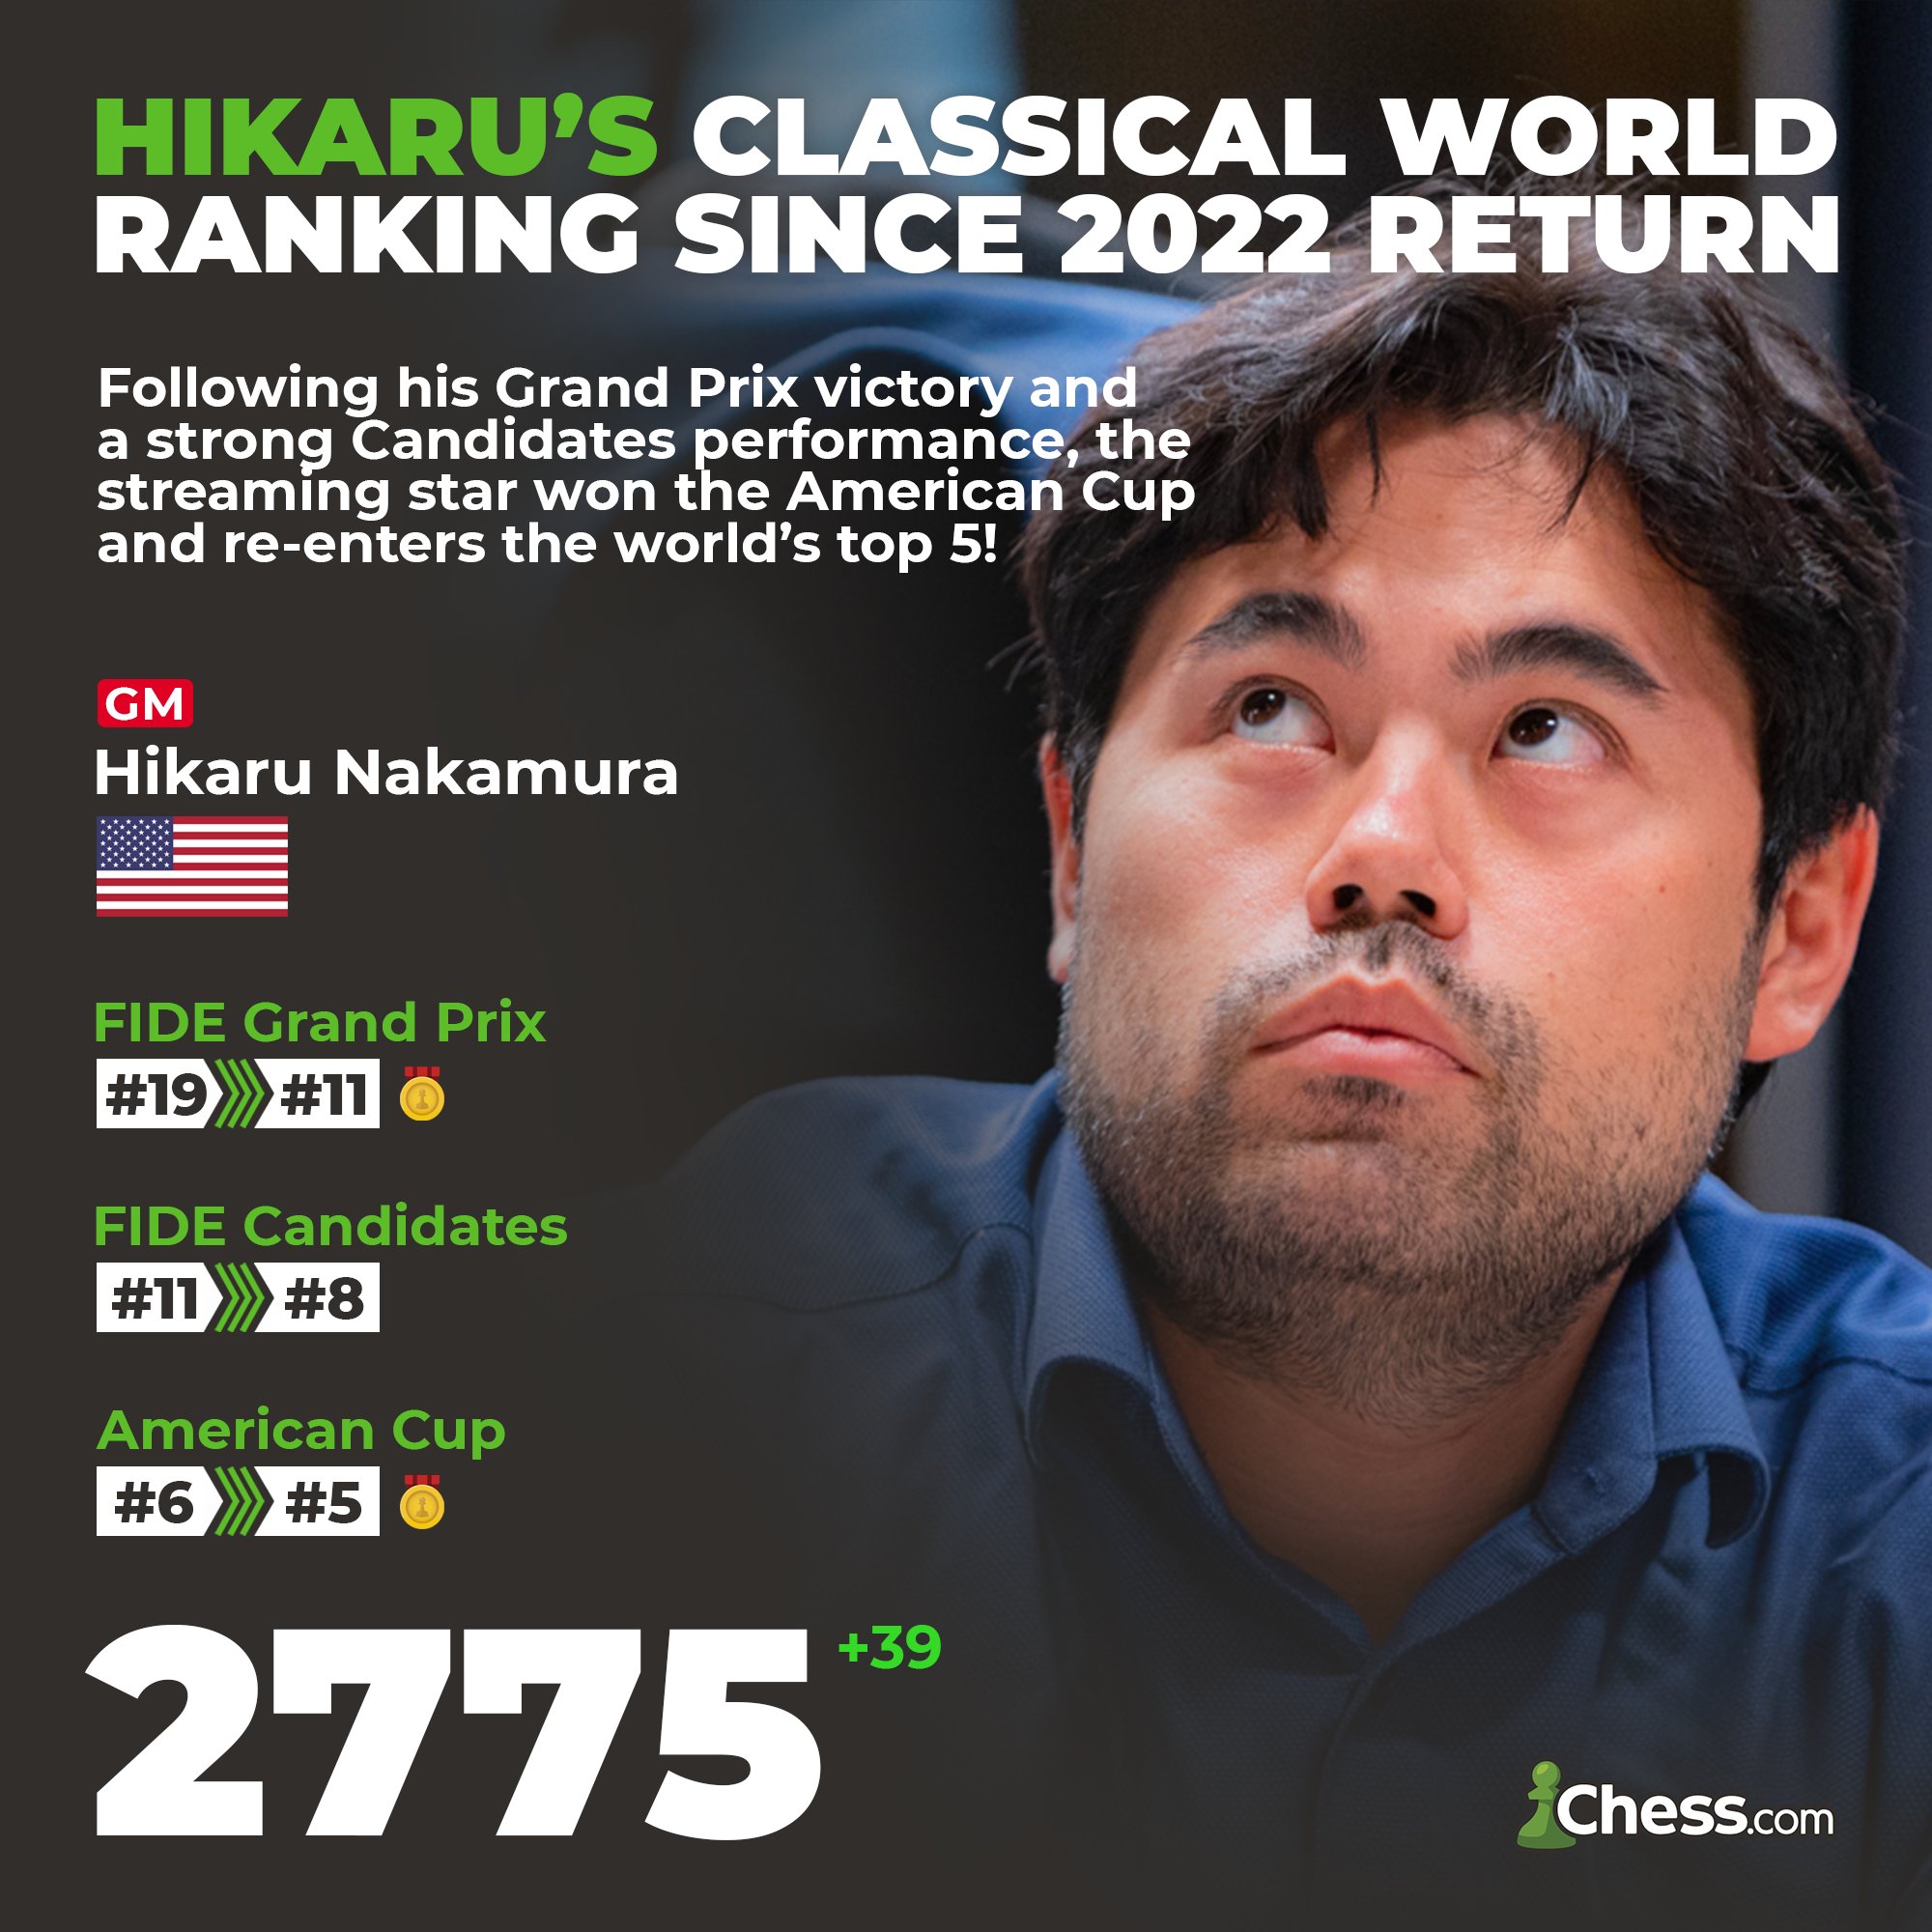 29th ADchessFestival on X: Today, we had the pleasure of hosting GM Hikaru  Nakamura, the world's second-ranked chess player, a five-time U.S.  Champion, and a widely renowned figure in the streaming and